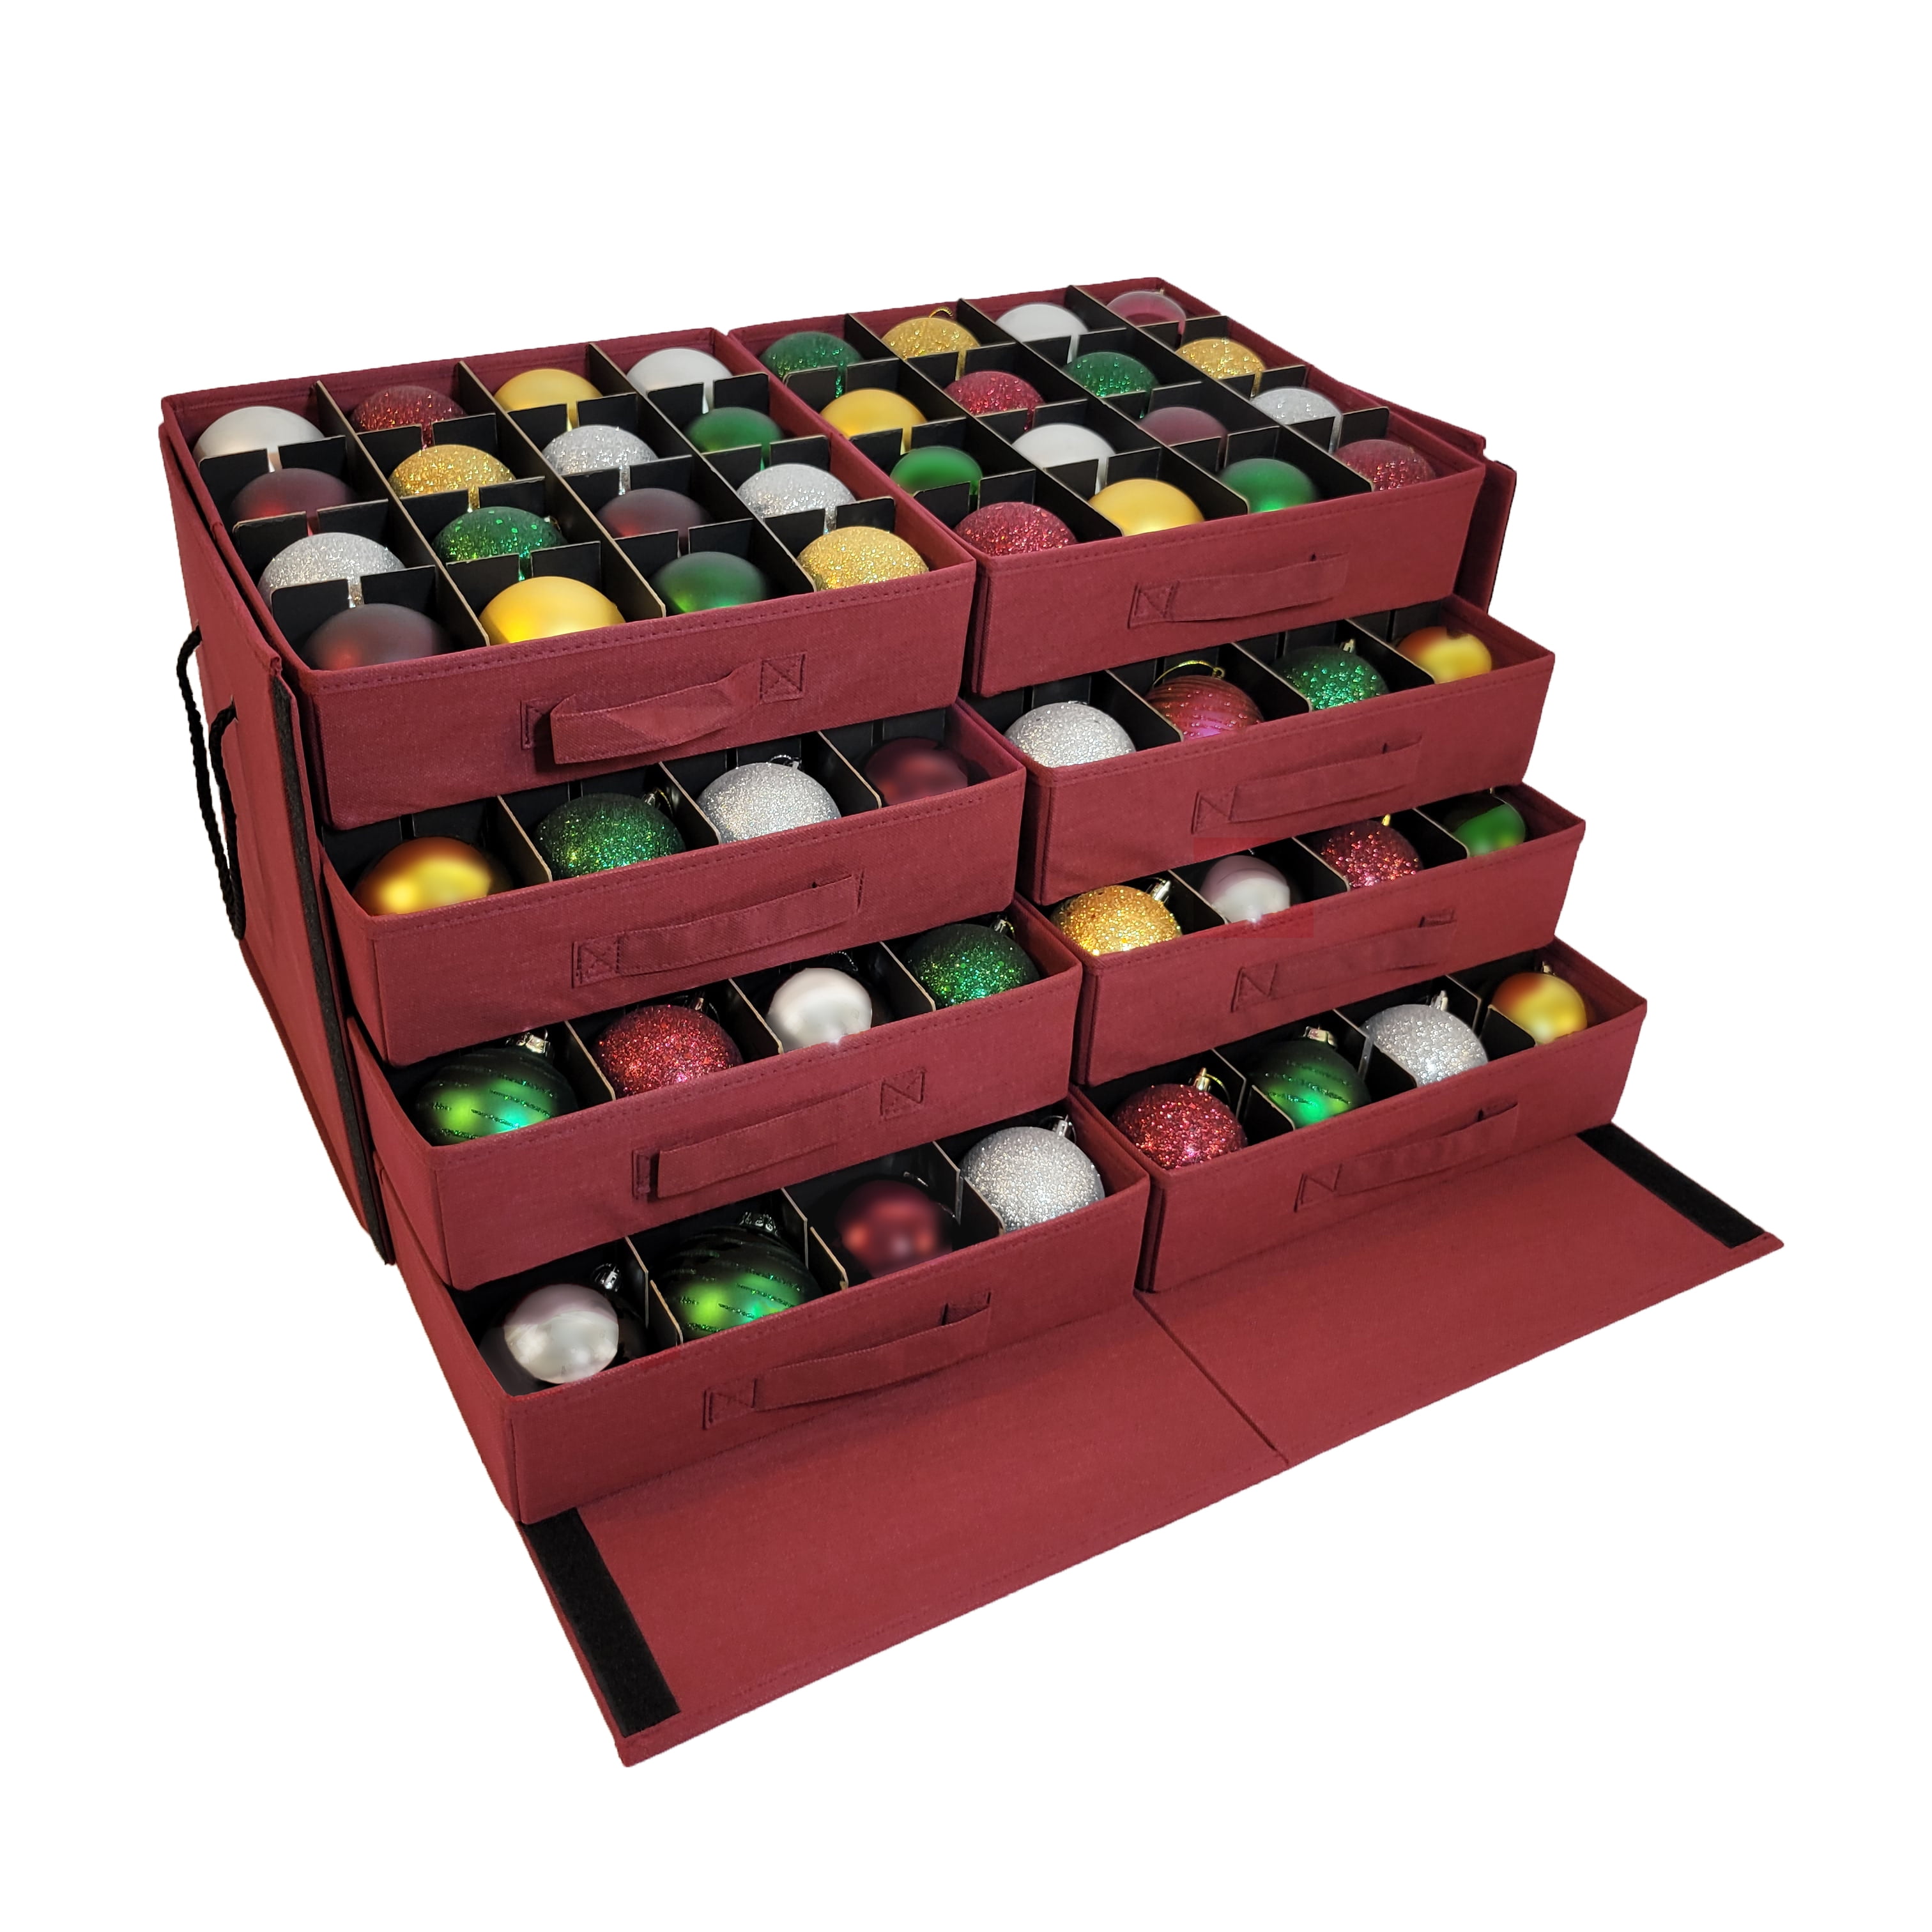 612 Vermont Christmas Ornament Storage Box with Adjustable Acid-Free Dividers, Holds 54 – 4 inch Ornaments (SB-40042-VT)